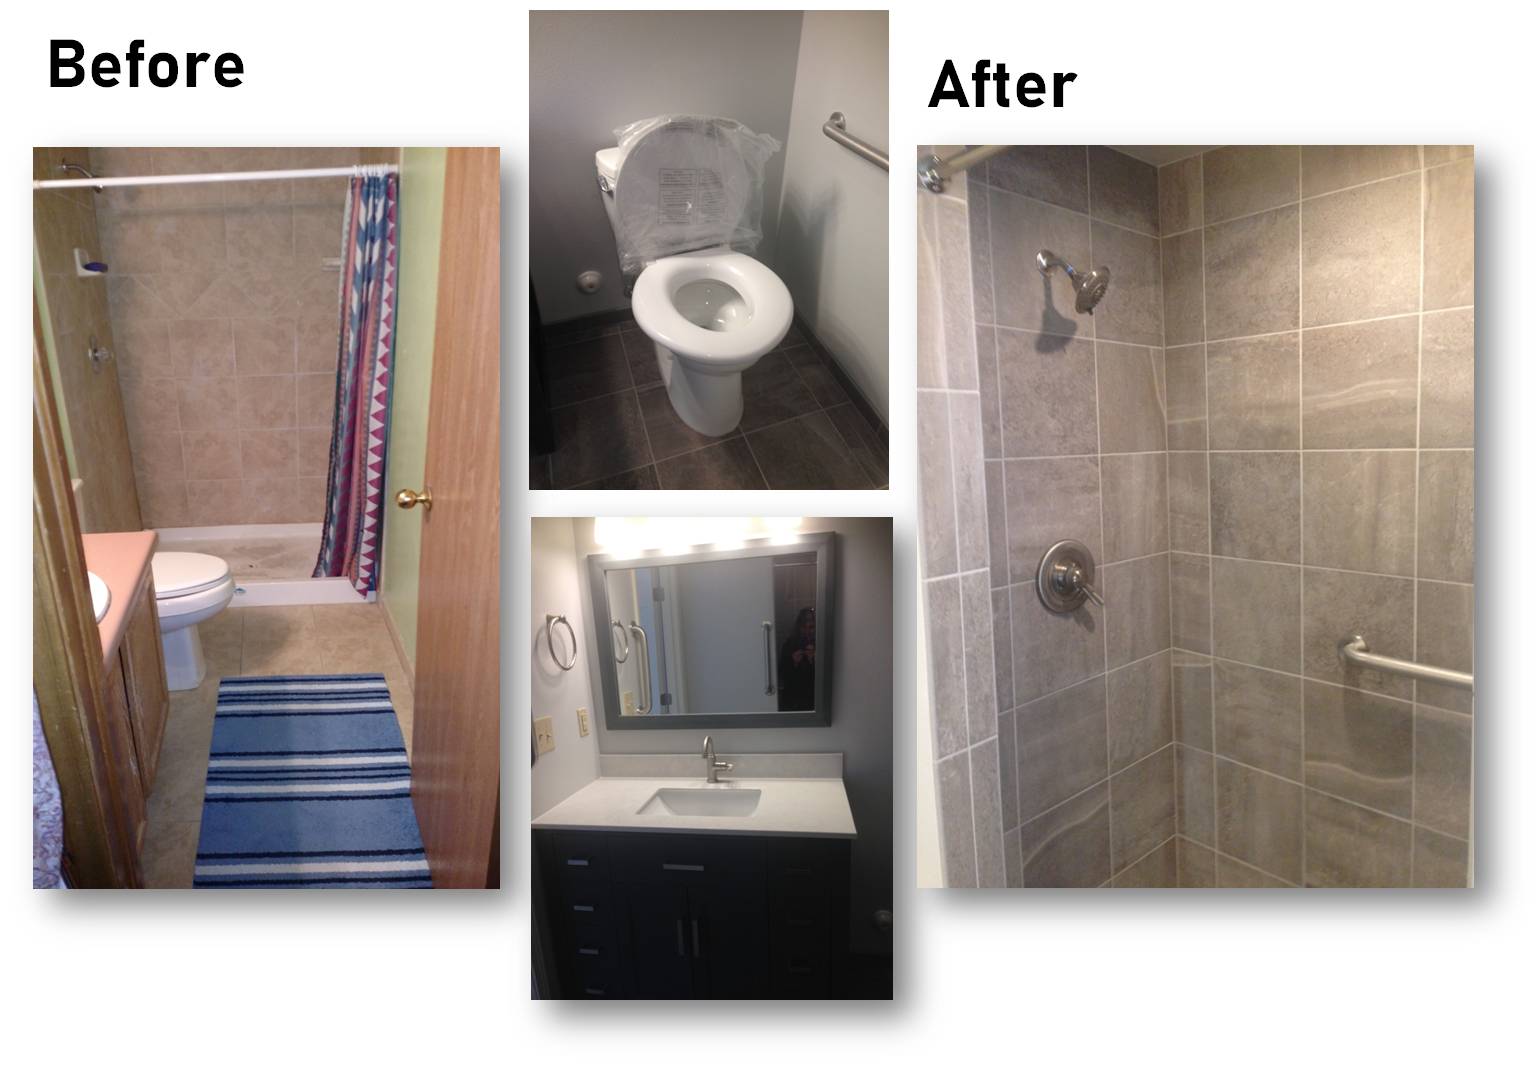 https://handymanconnection.com/colorado-springs/wp-content/uploads/sites/5/2021/05/Before-and-After-Photos-of-Bathroom-Remodel.jpg